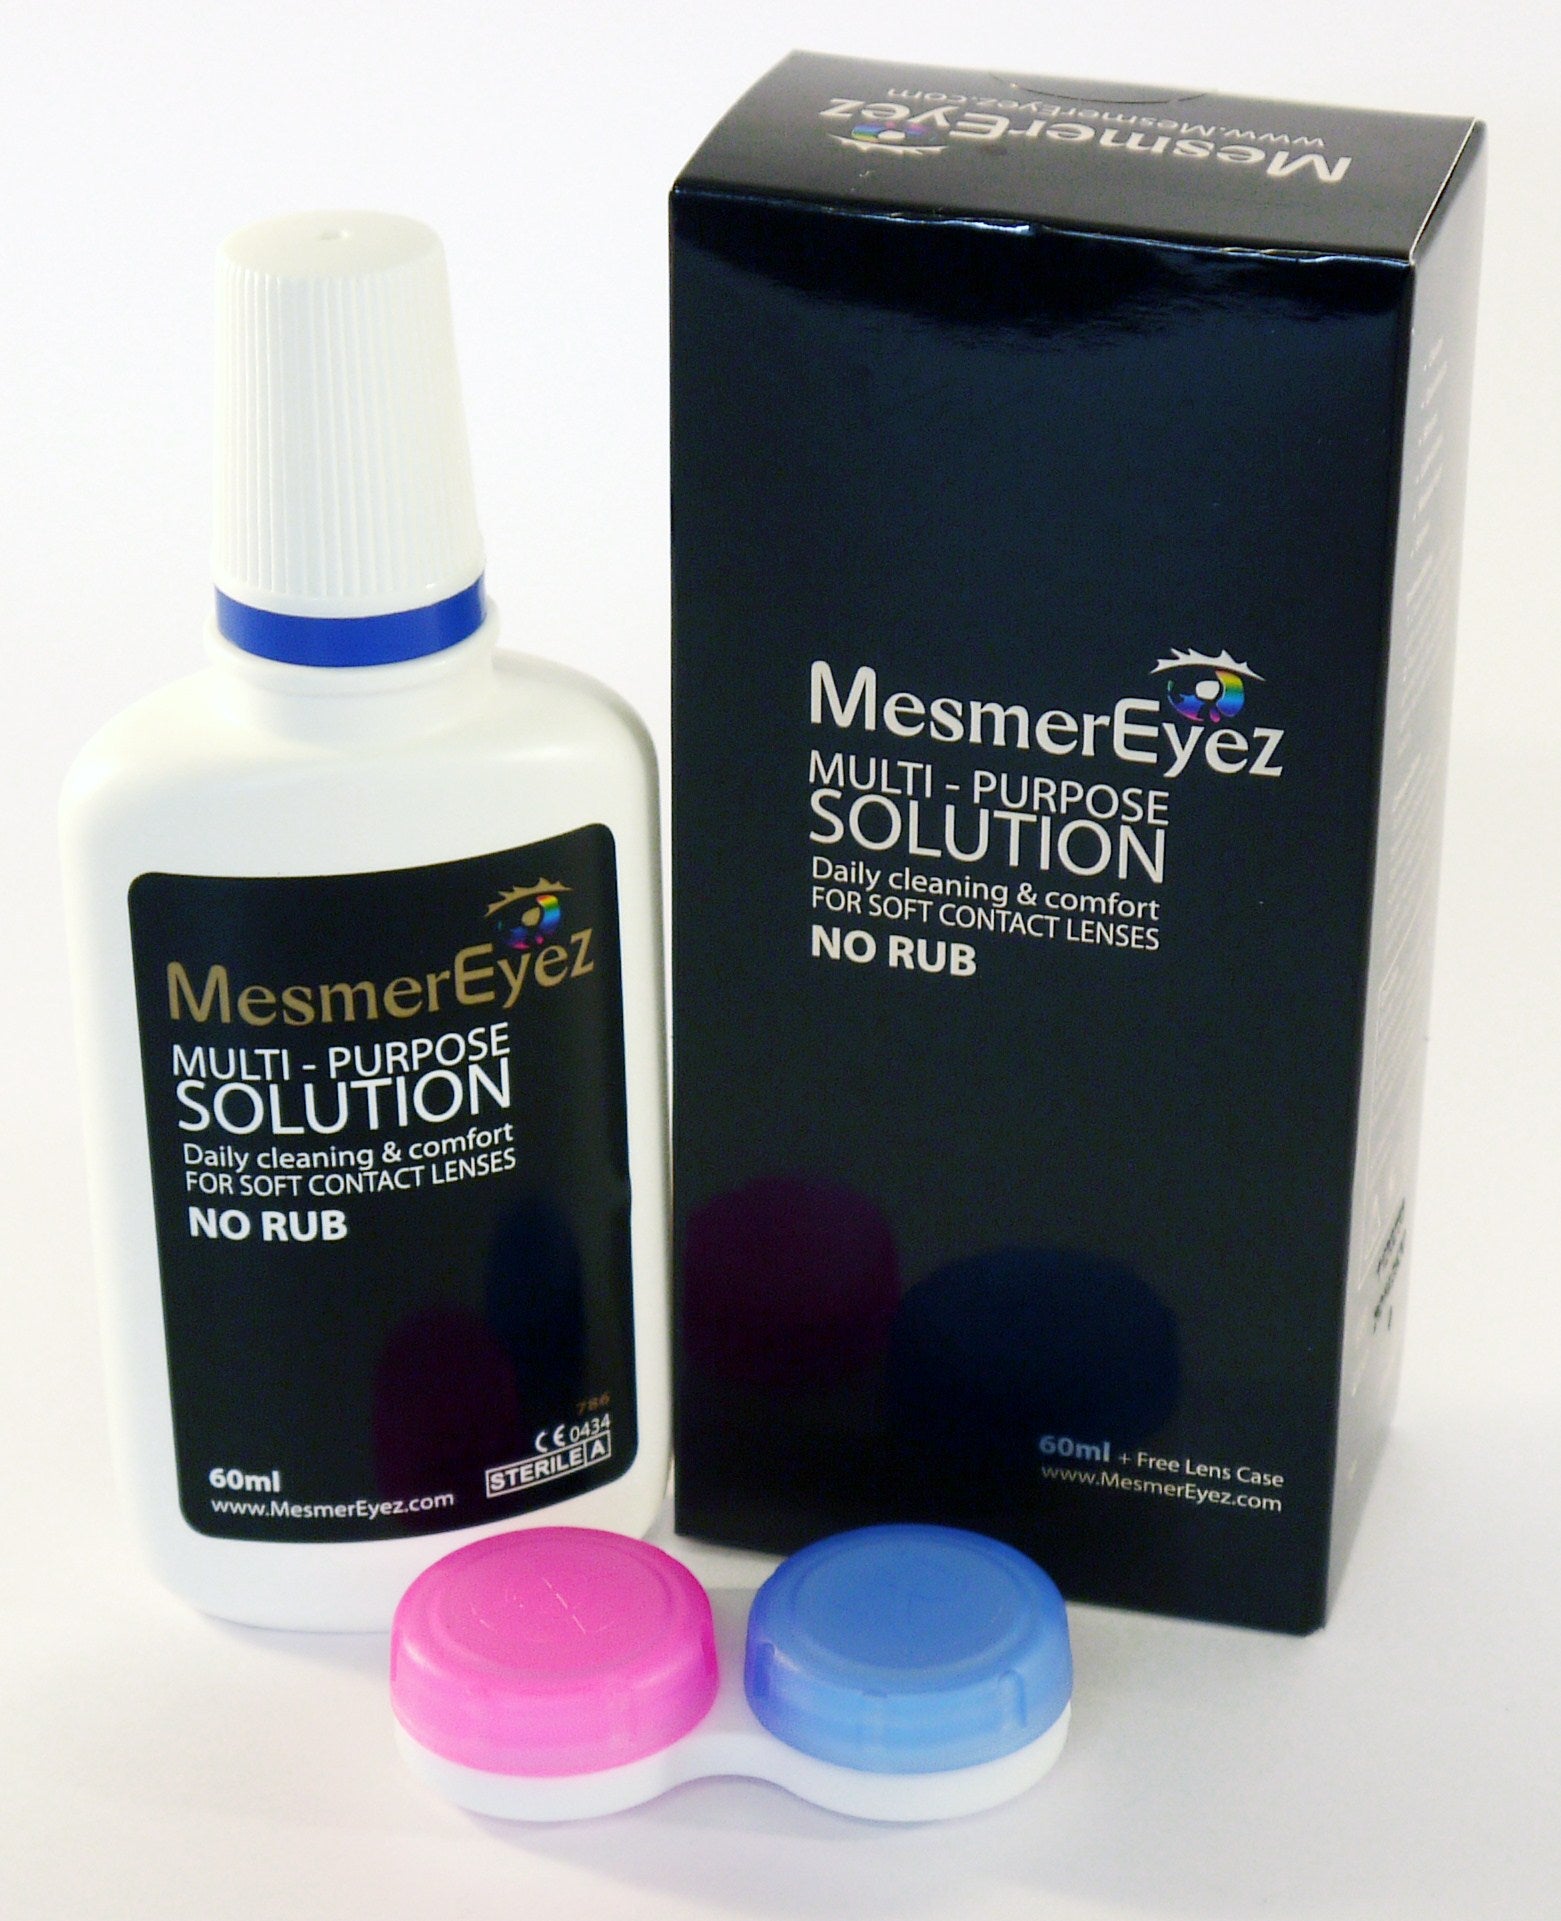 Eyewear Care Kit (60ml Solution boxed with lens case and instructions)